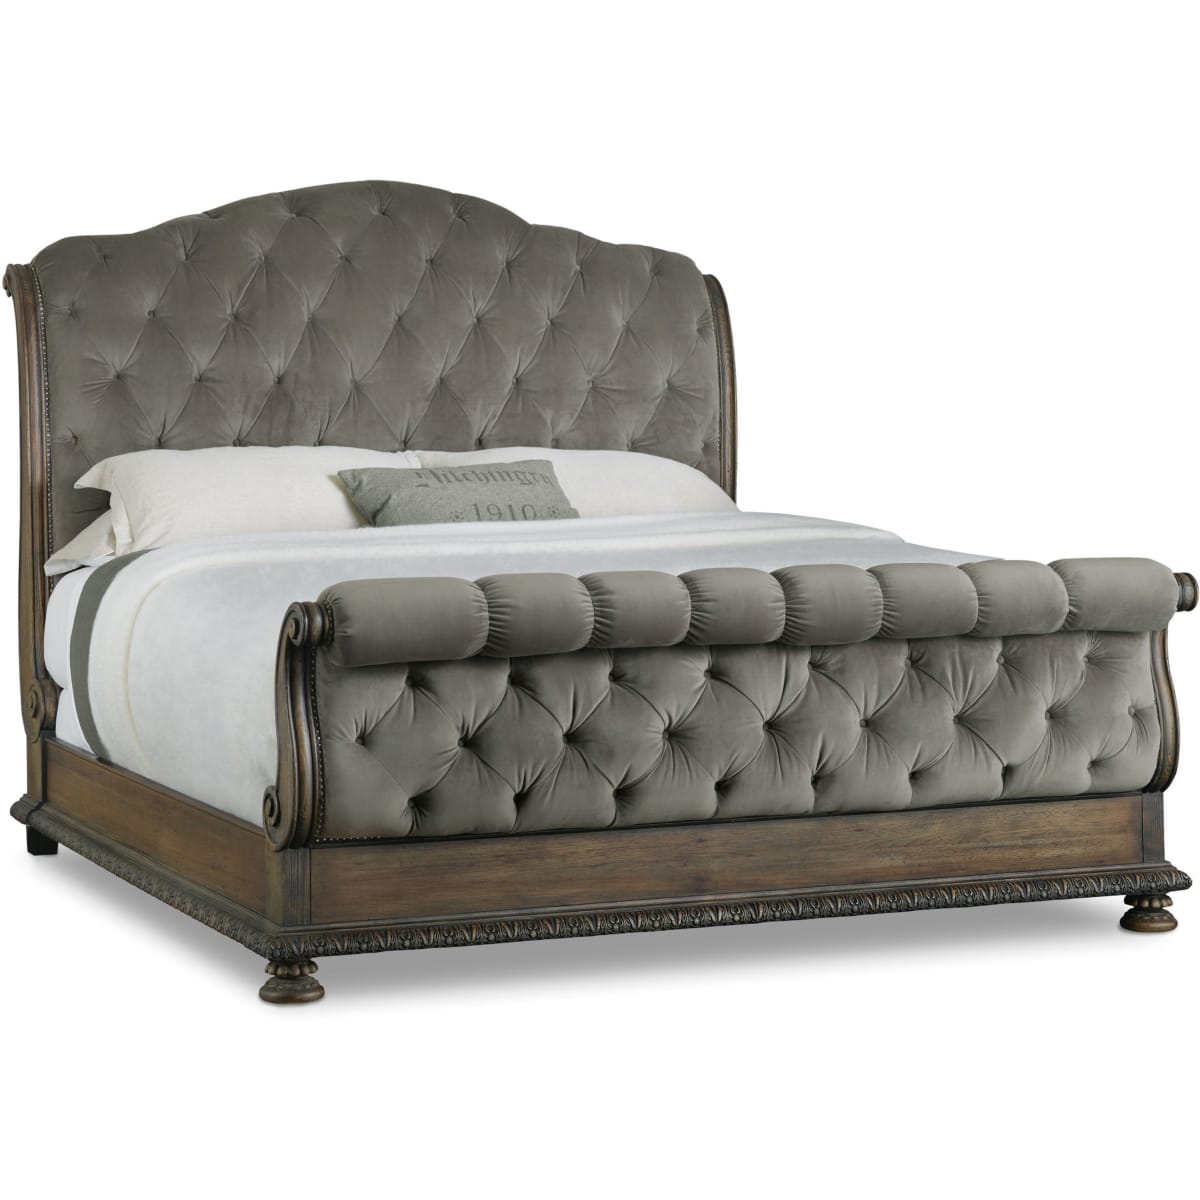 Furniture 5070 90566a Gry, Grand King Bed Frame